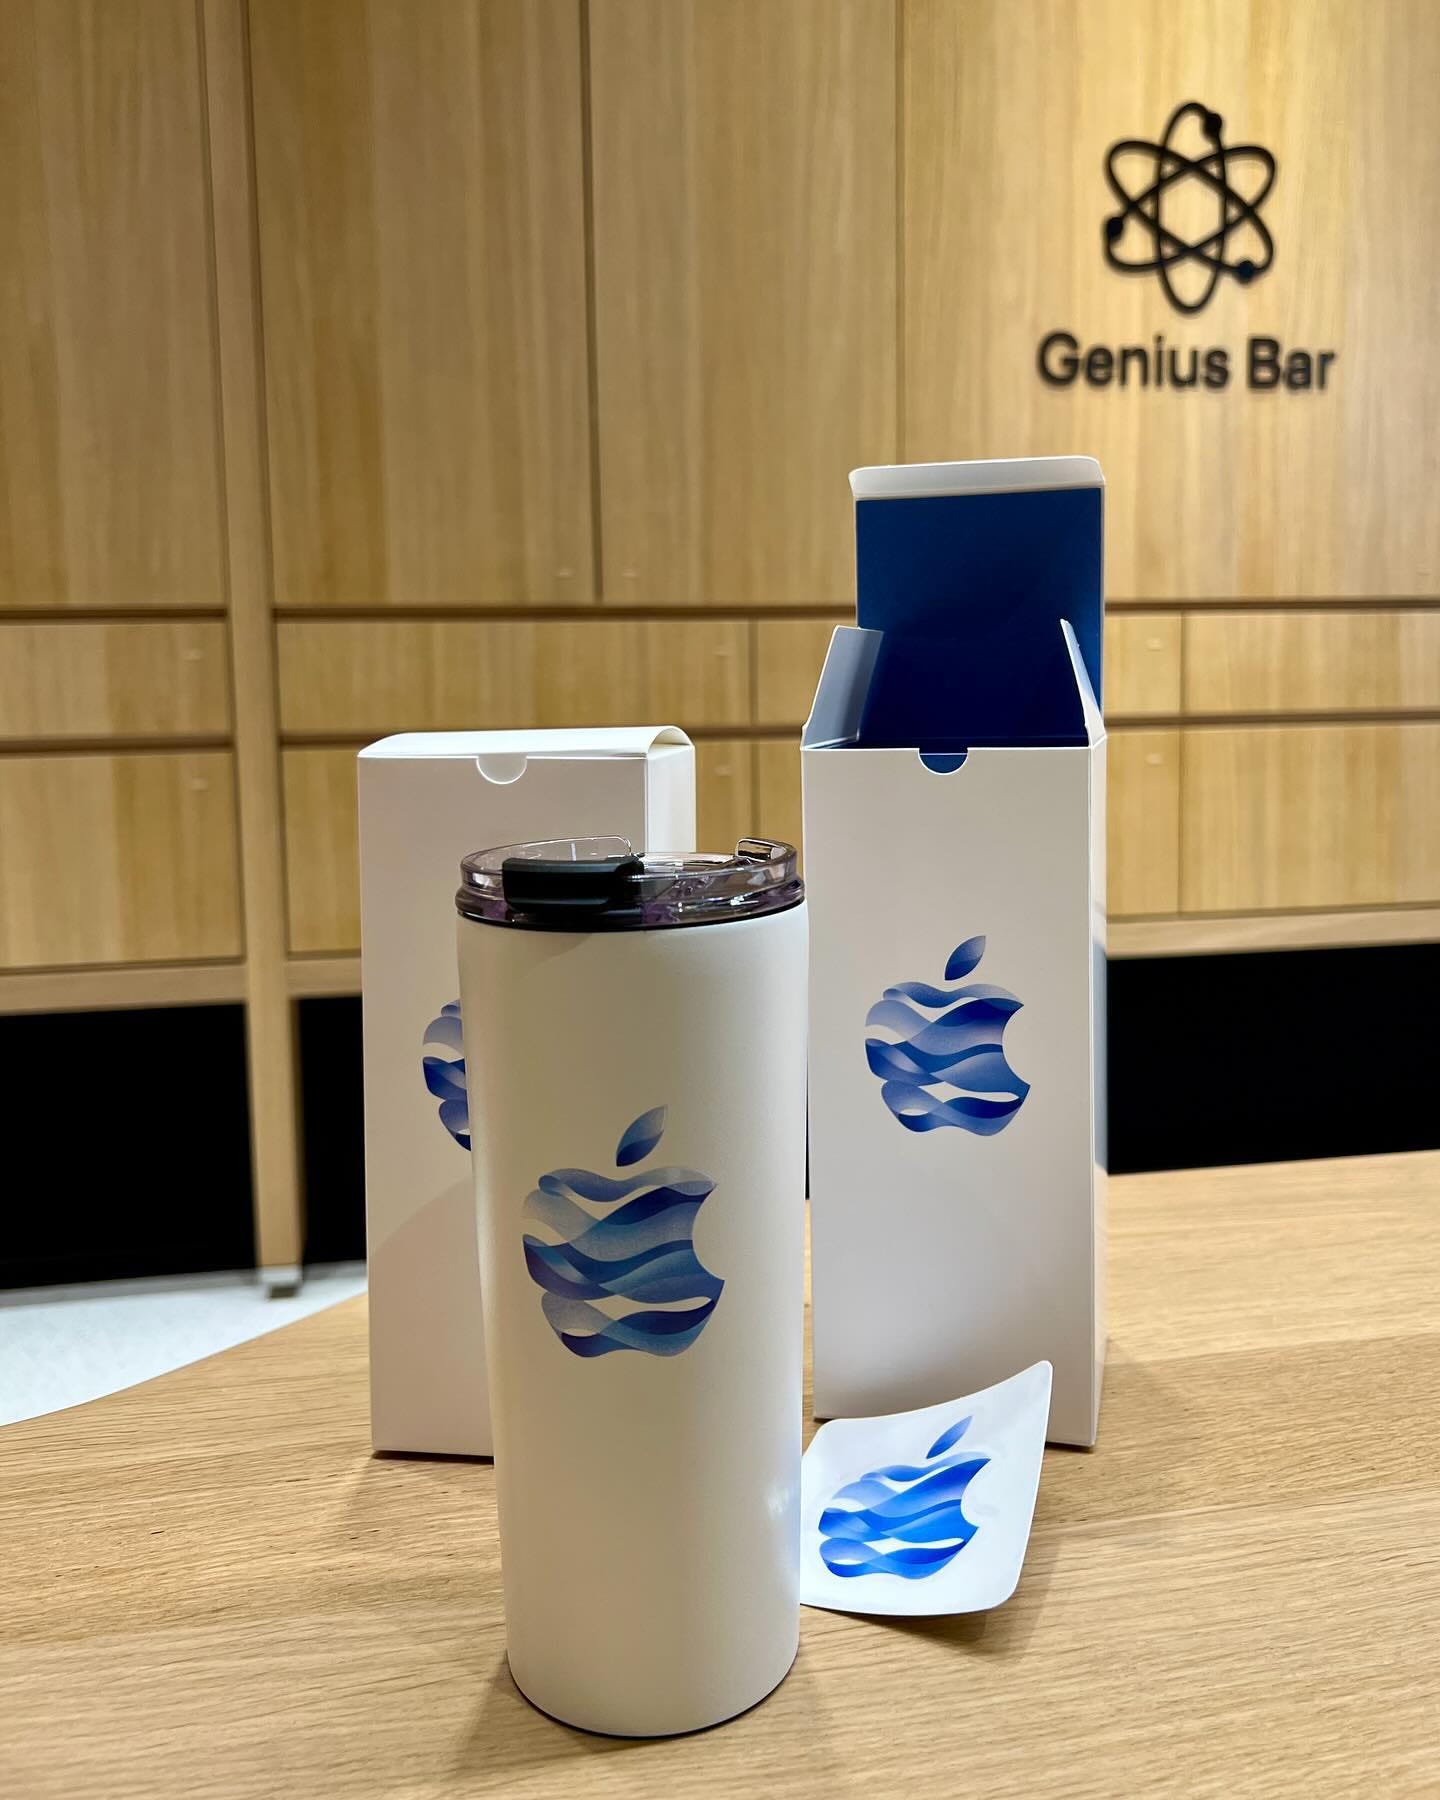 A tumbler, box and sticker given to visitors at Apple Hanam. The souvenirs are pictured on the store's Genius Bar.